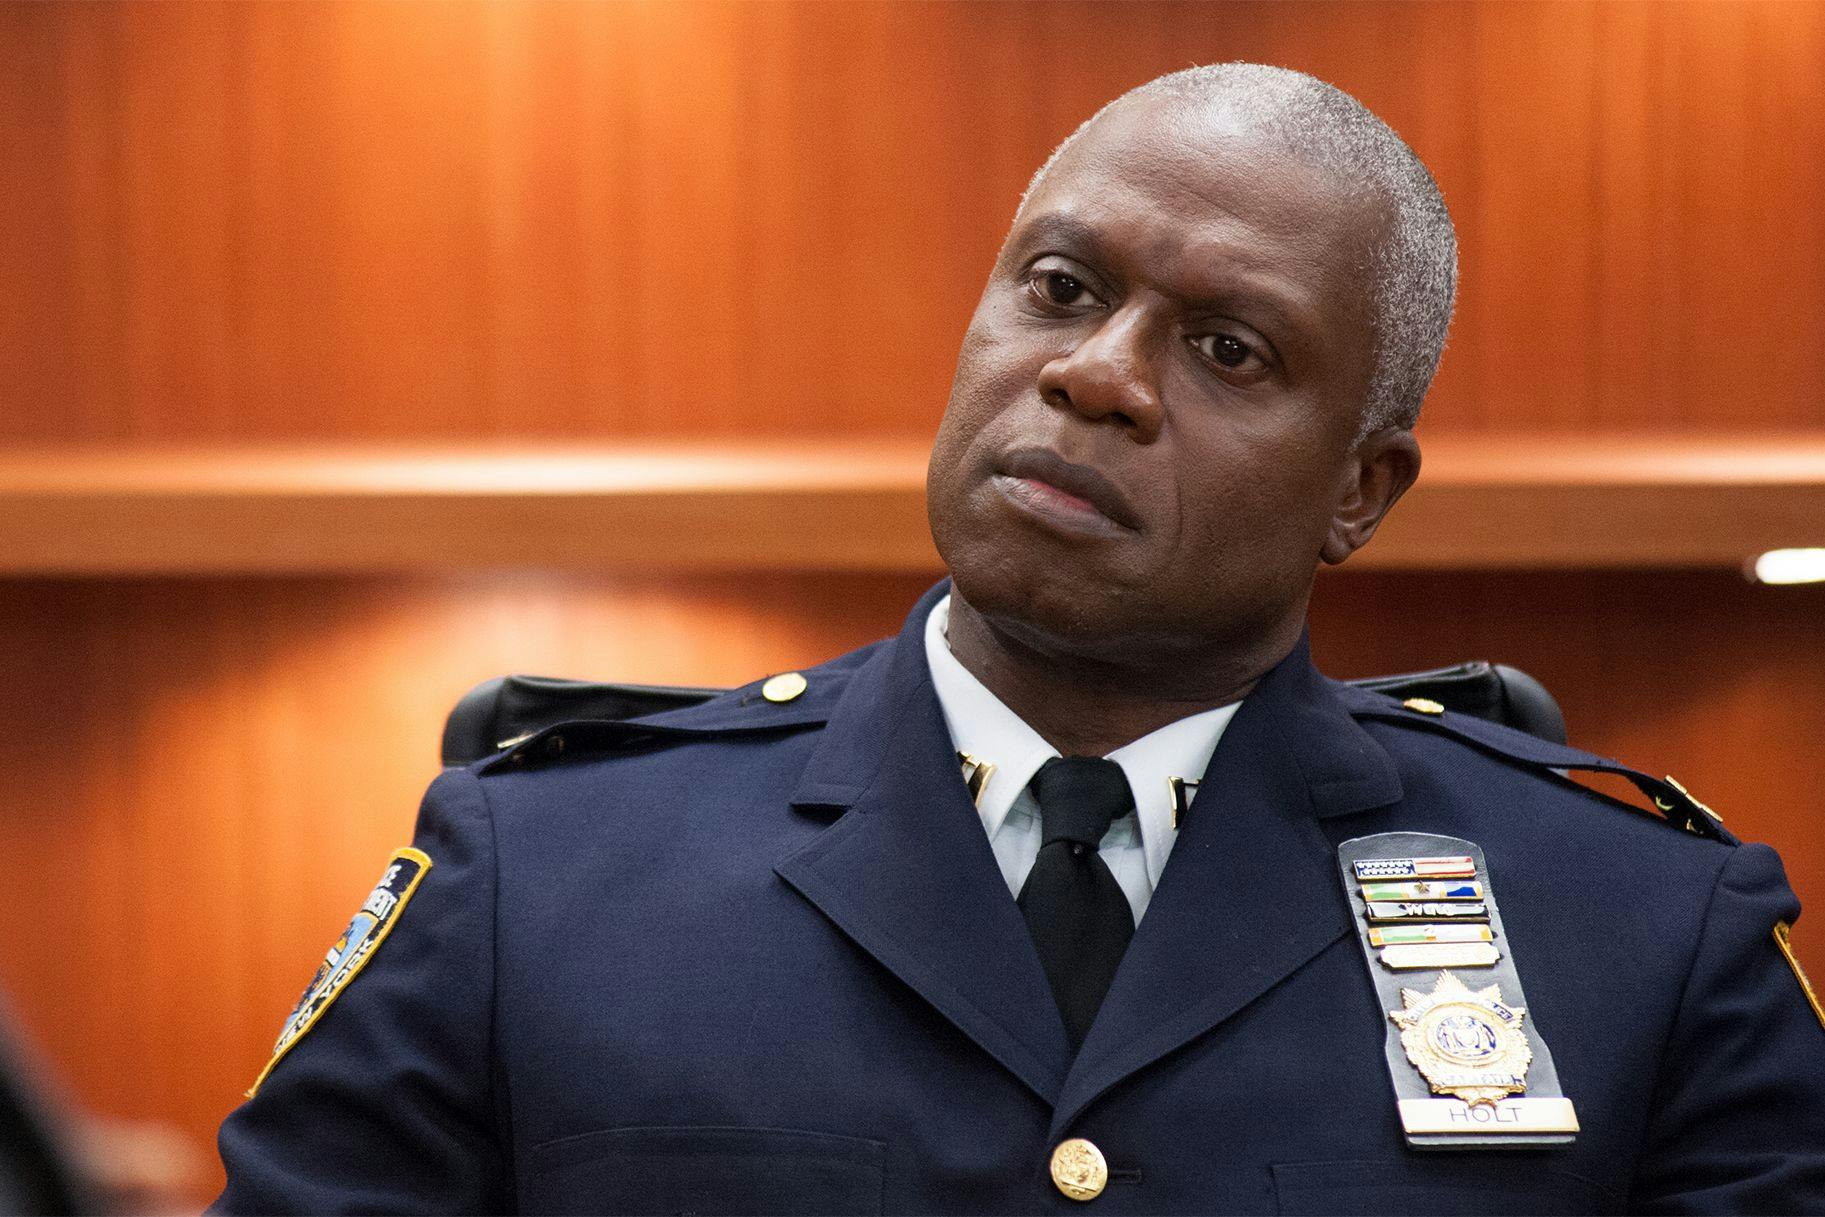 Captain Holt personality type